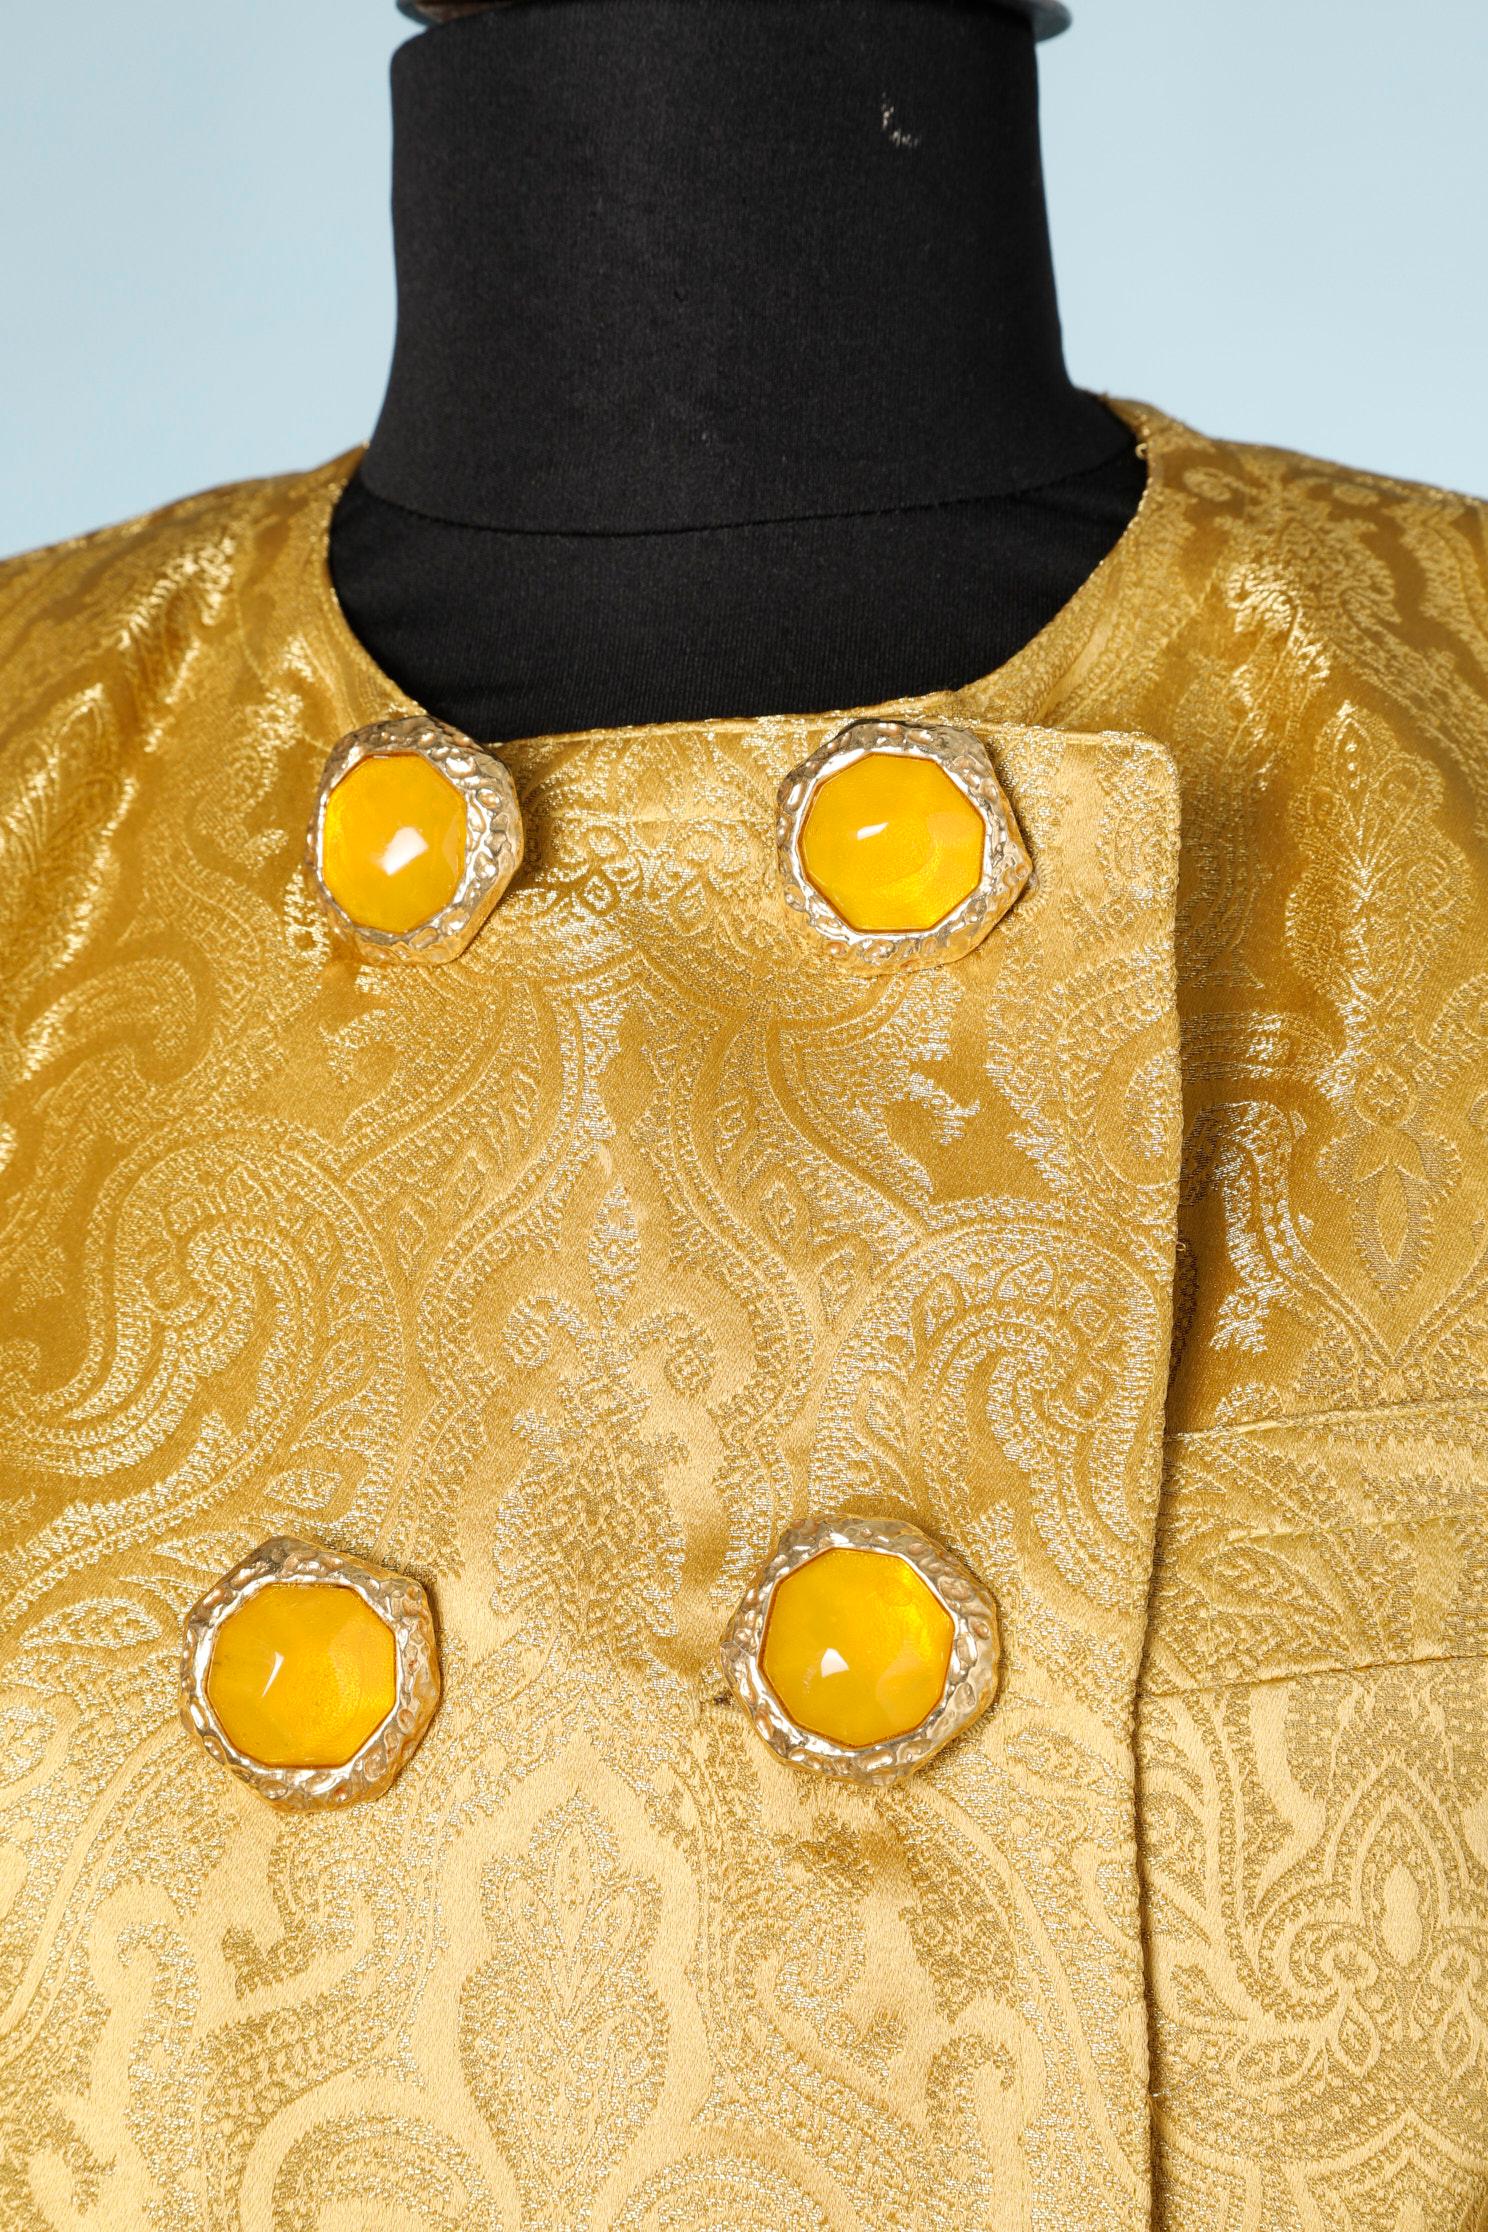 Yellow damasked double breasted skirt suit with Jewlery buttons and silk lining 